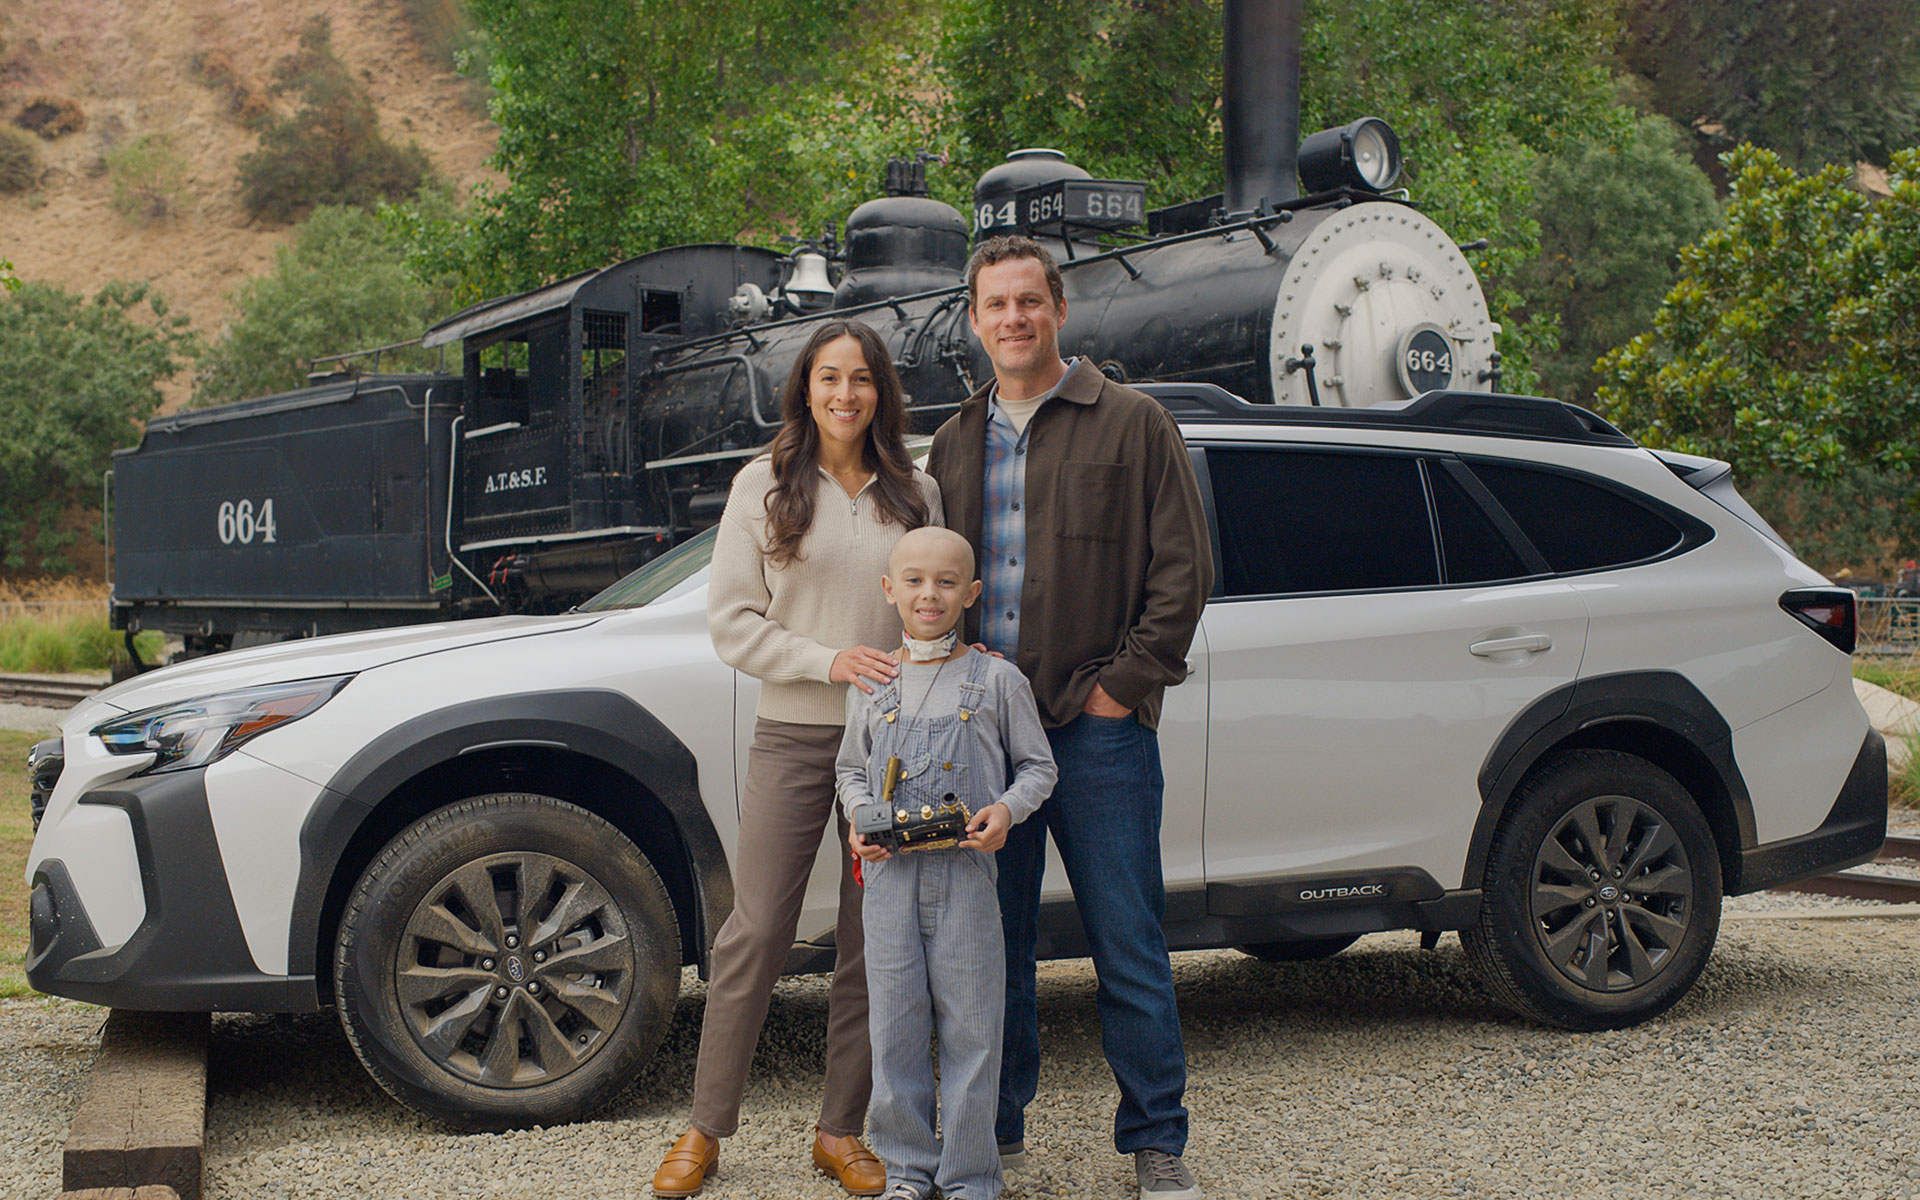 Boy holding toy train standing with parents in front of a Subaru Outback and train.